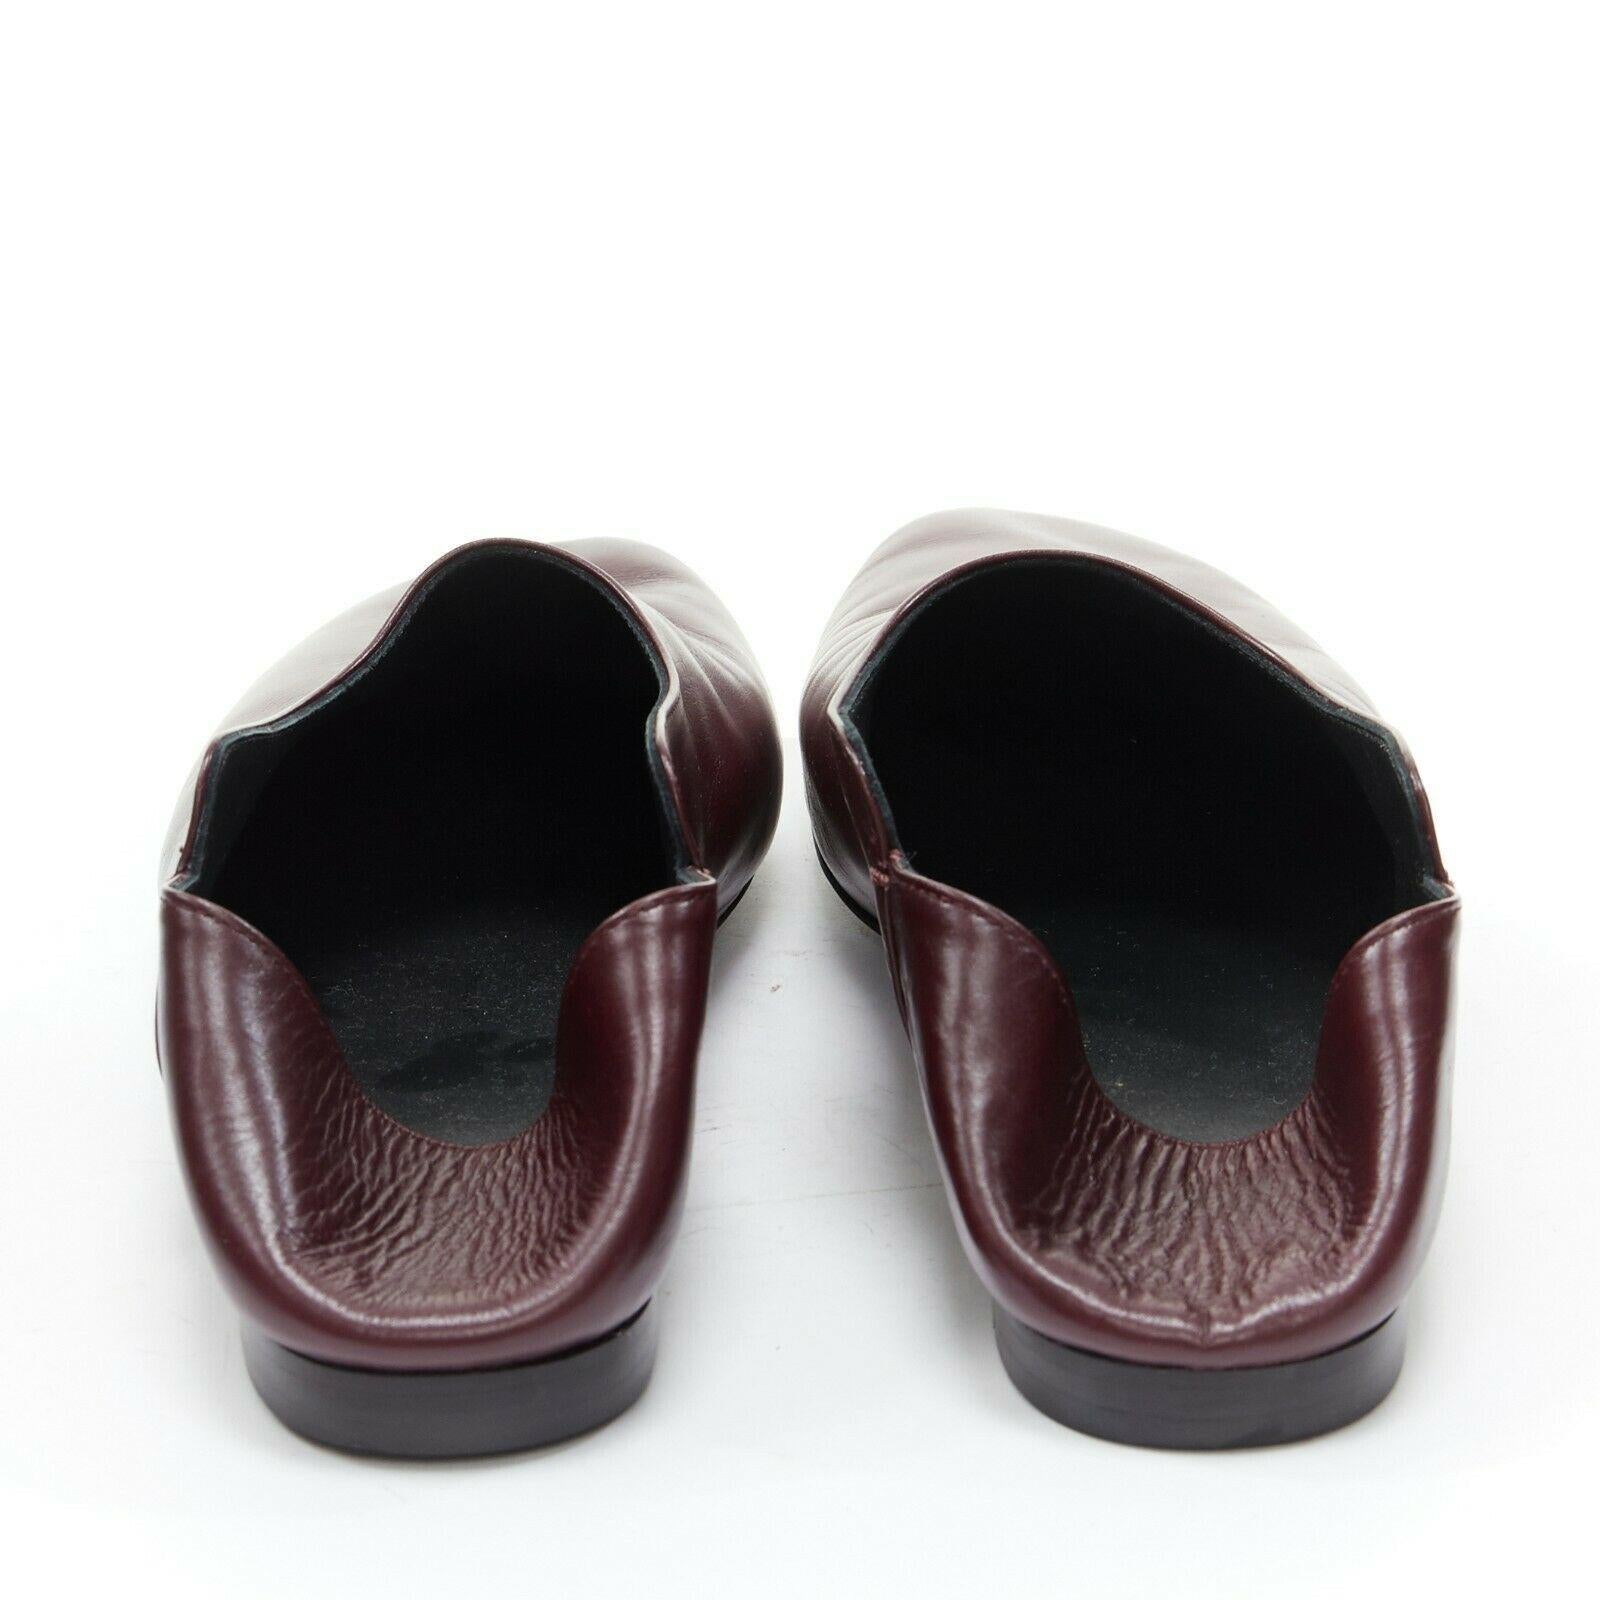 Women's THE ROW dark burgundy leather round toe collapsible step back flats shoes EU37